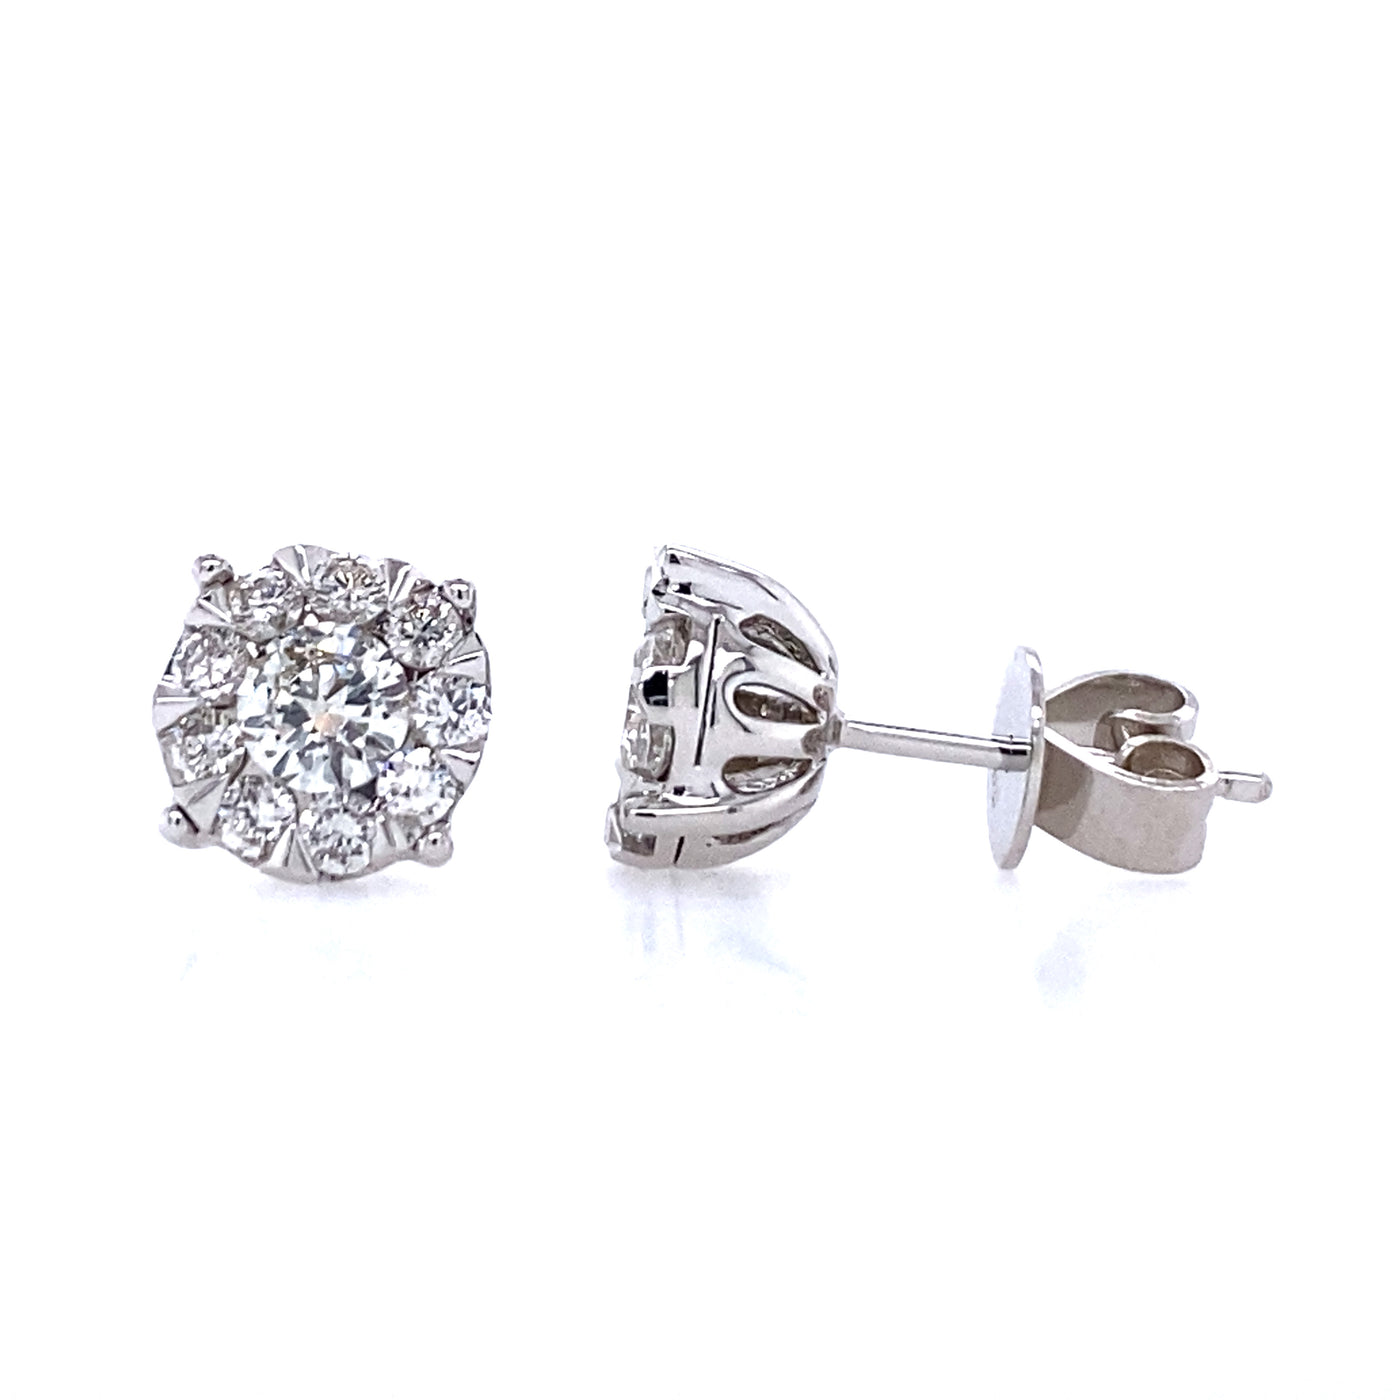 14 KT White Gold 1.0ctw Diamond Cluster Stud Earrings "Big Bang Collection"